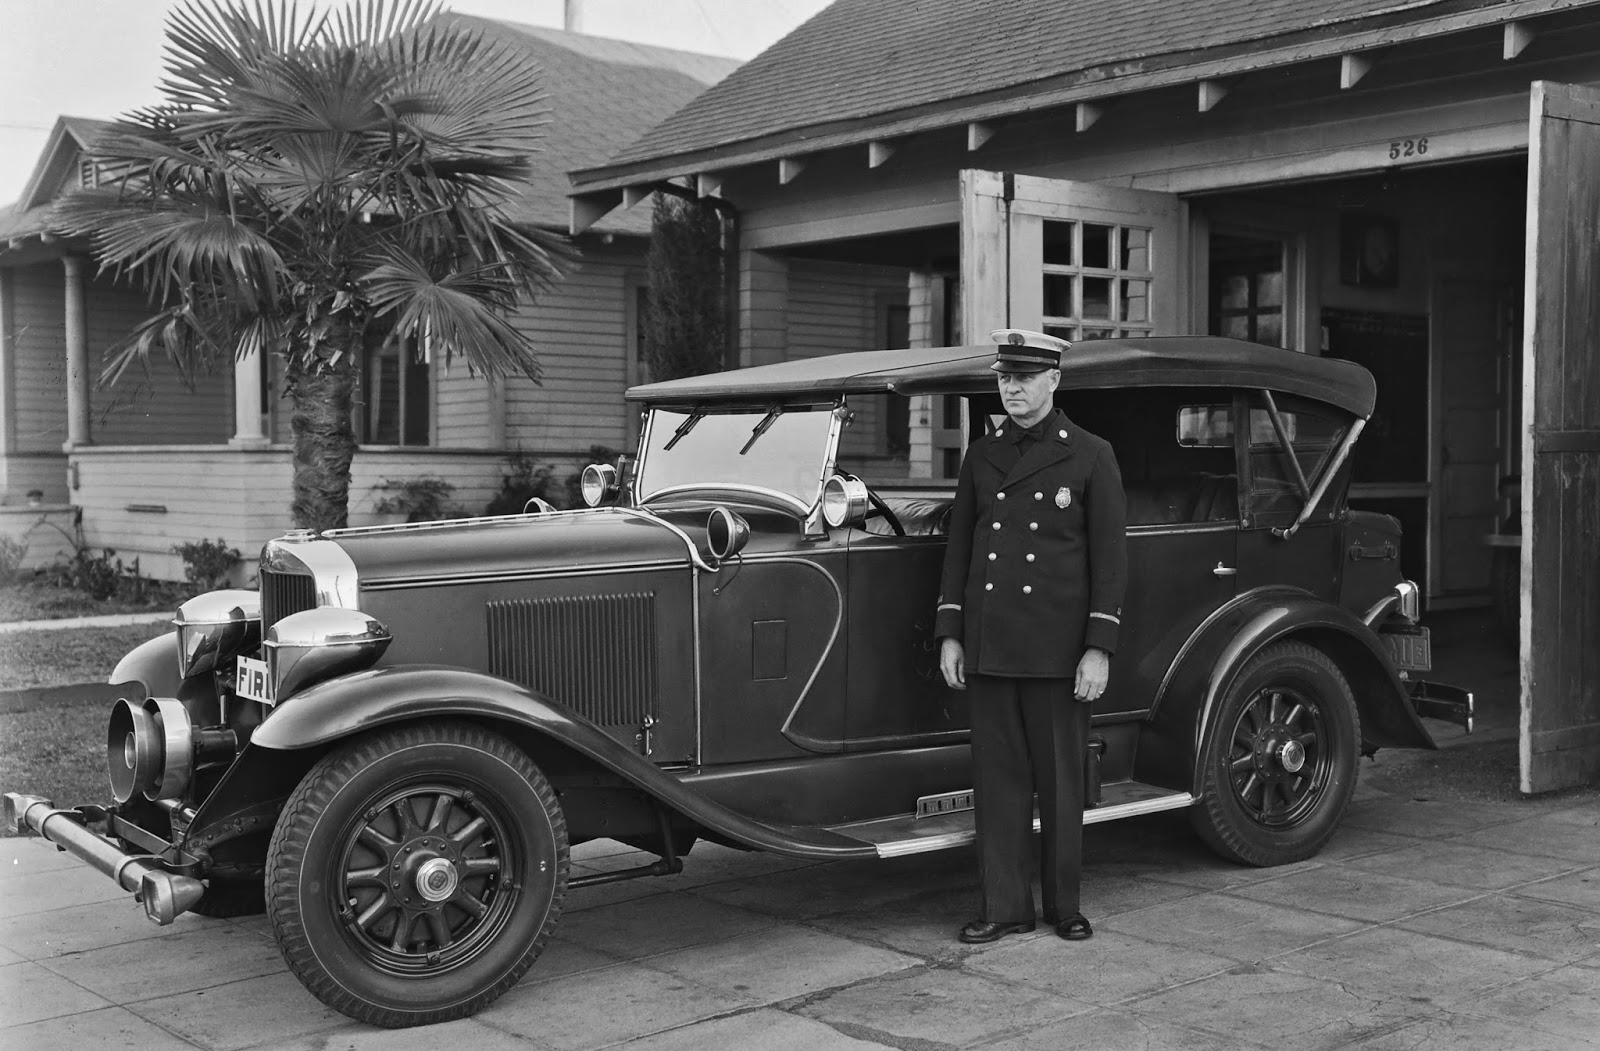 How cool is this, the fire chief bought a 1927 Graham Paige touring 621 wit...